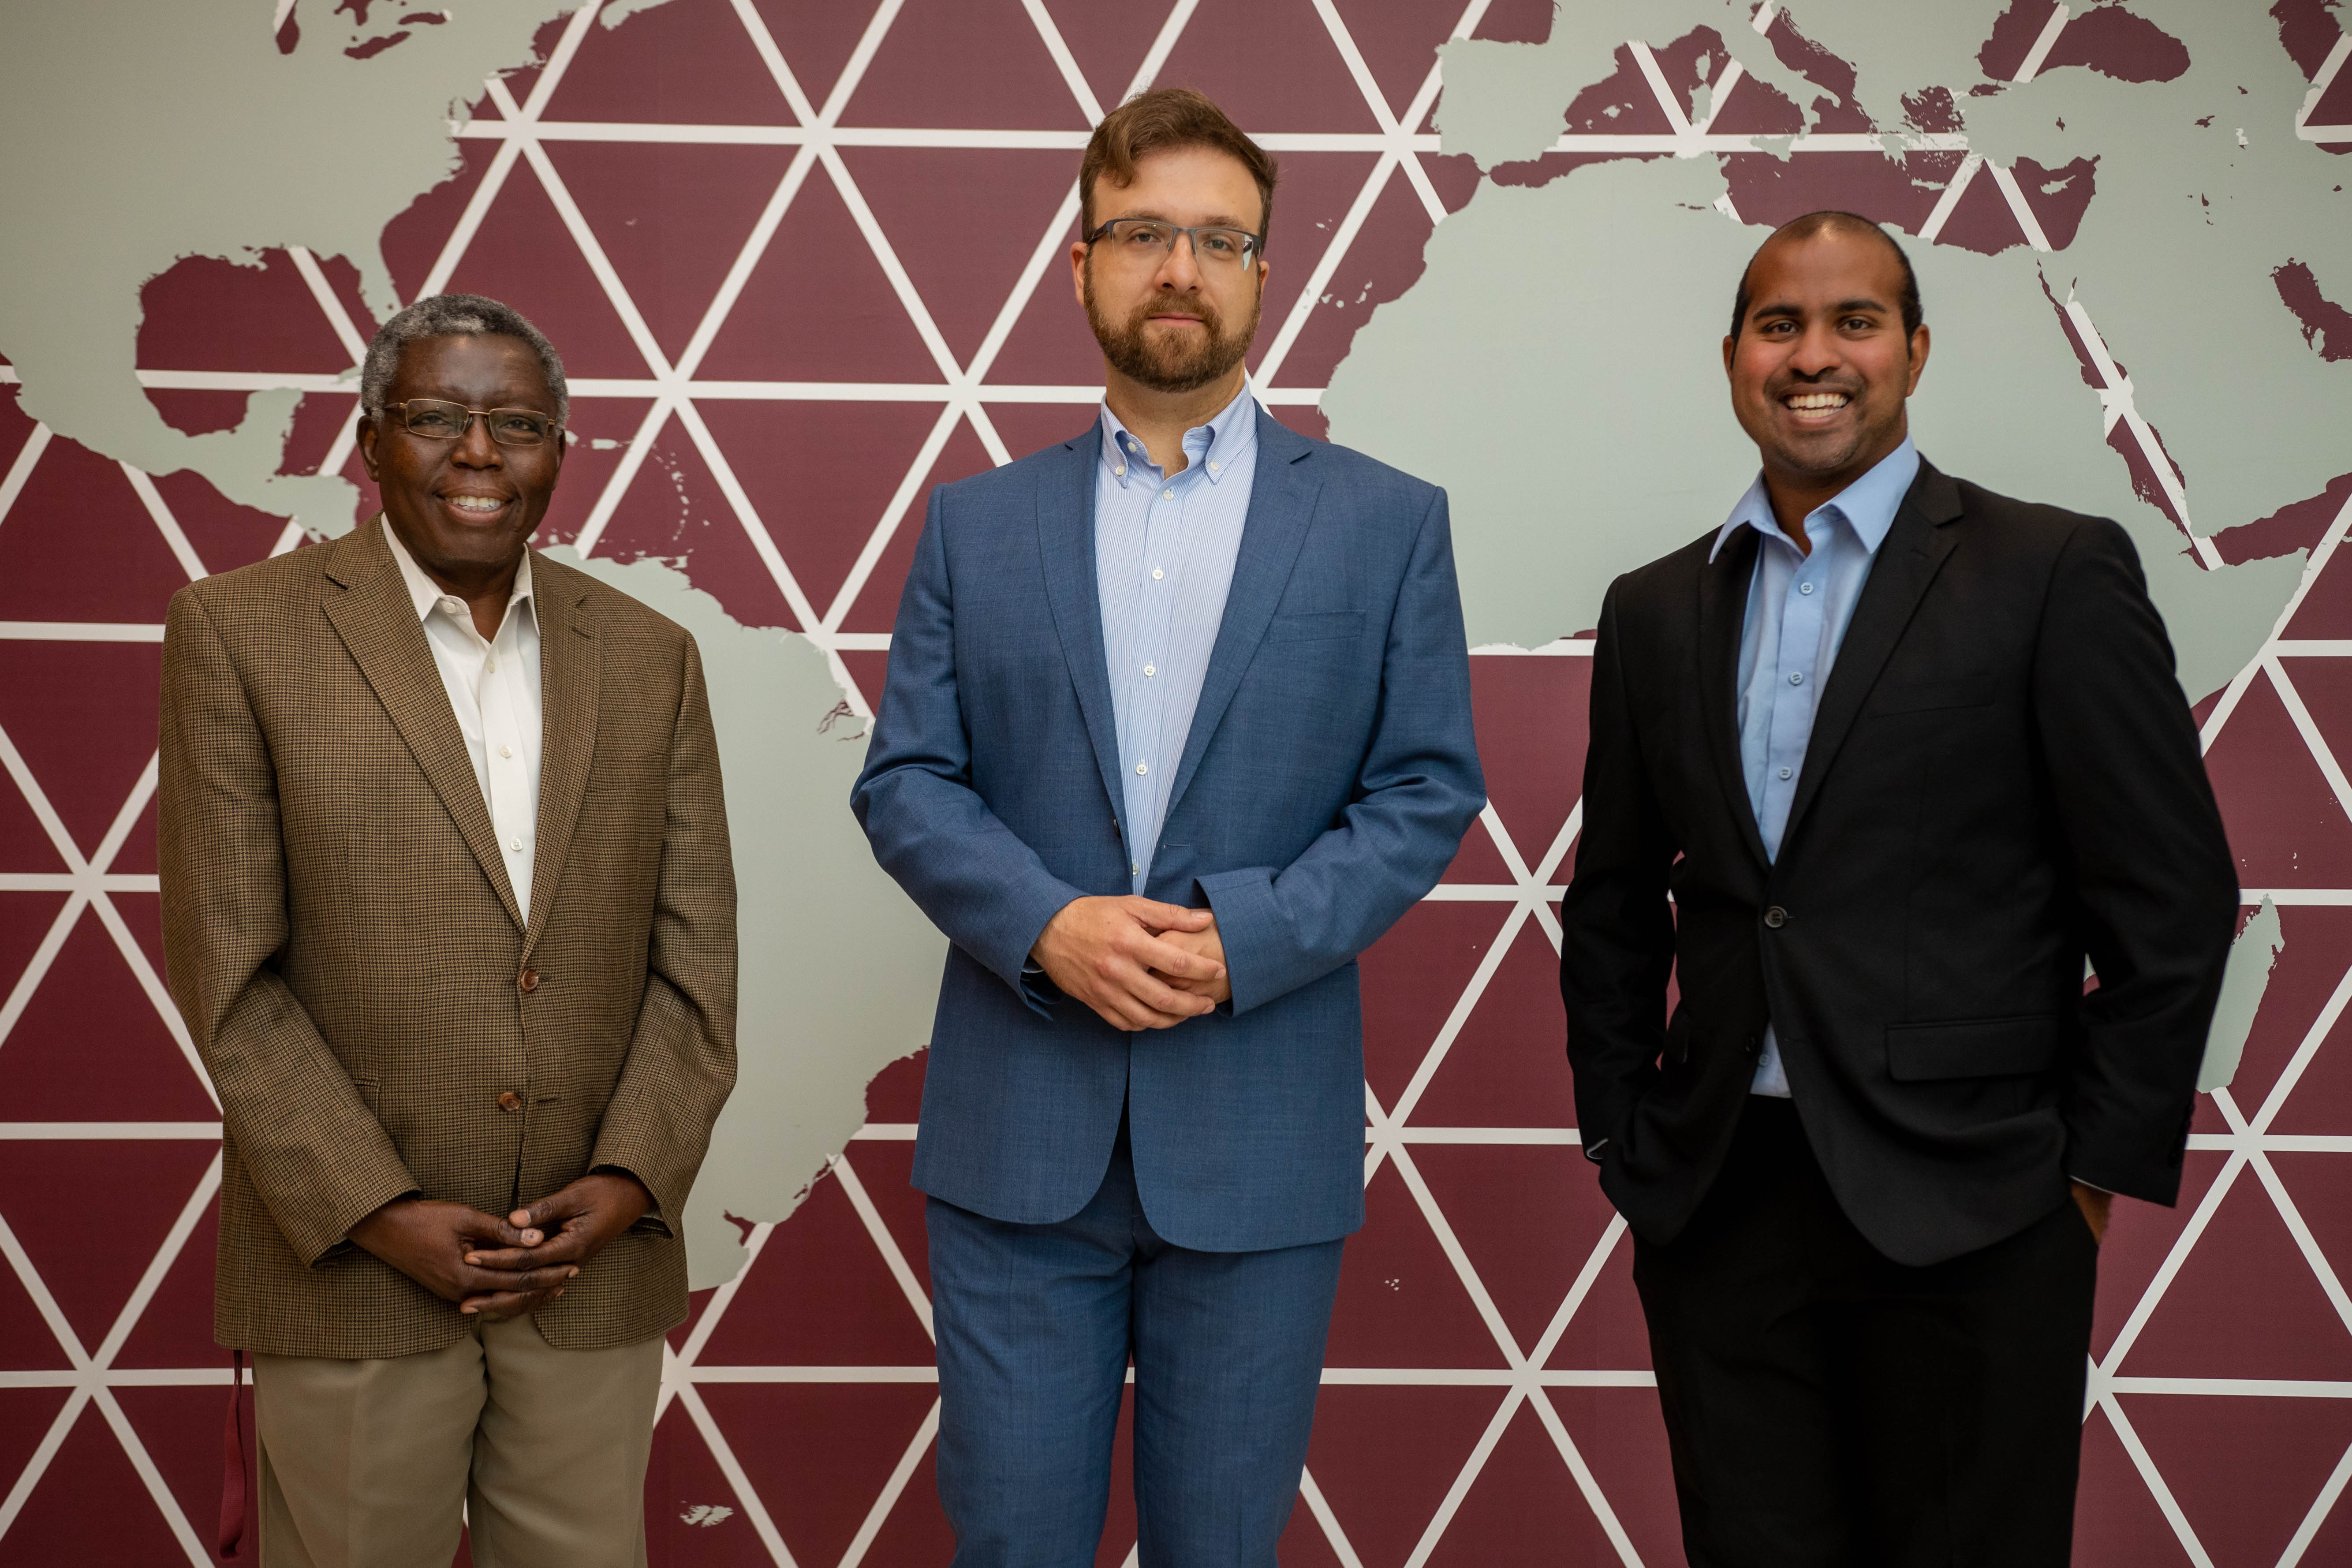 Pictured from left to right are Dr. Peter Haruna, professor of Public Administration; Dr. Adam Kozaczka, assistant professor of Humanities, and Dr. Jared Dmello, assistant professor of Criminal Justice.